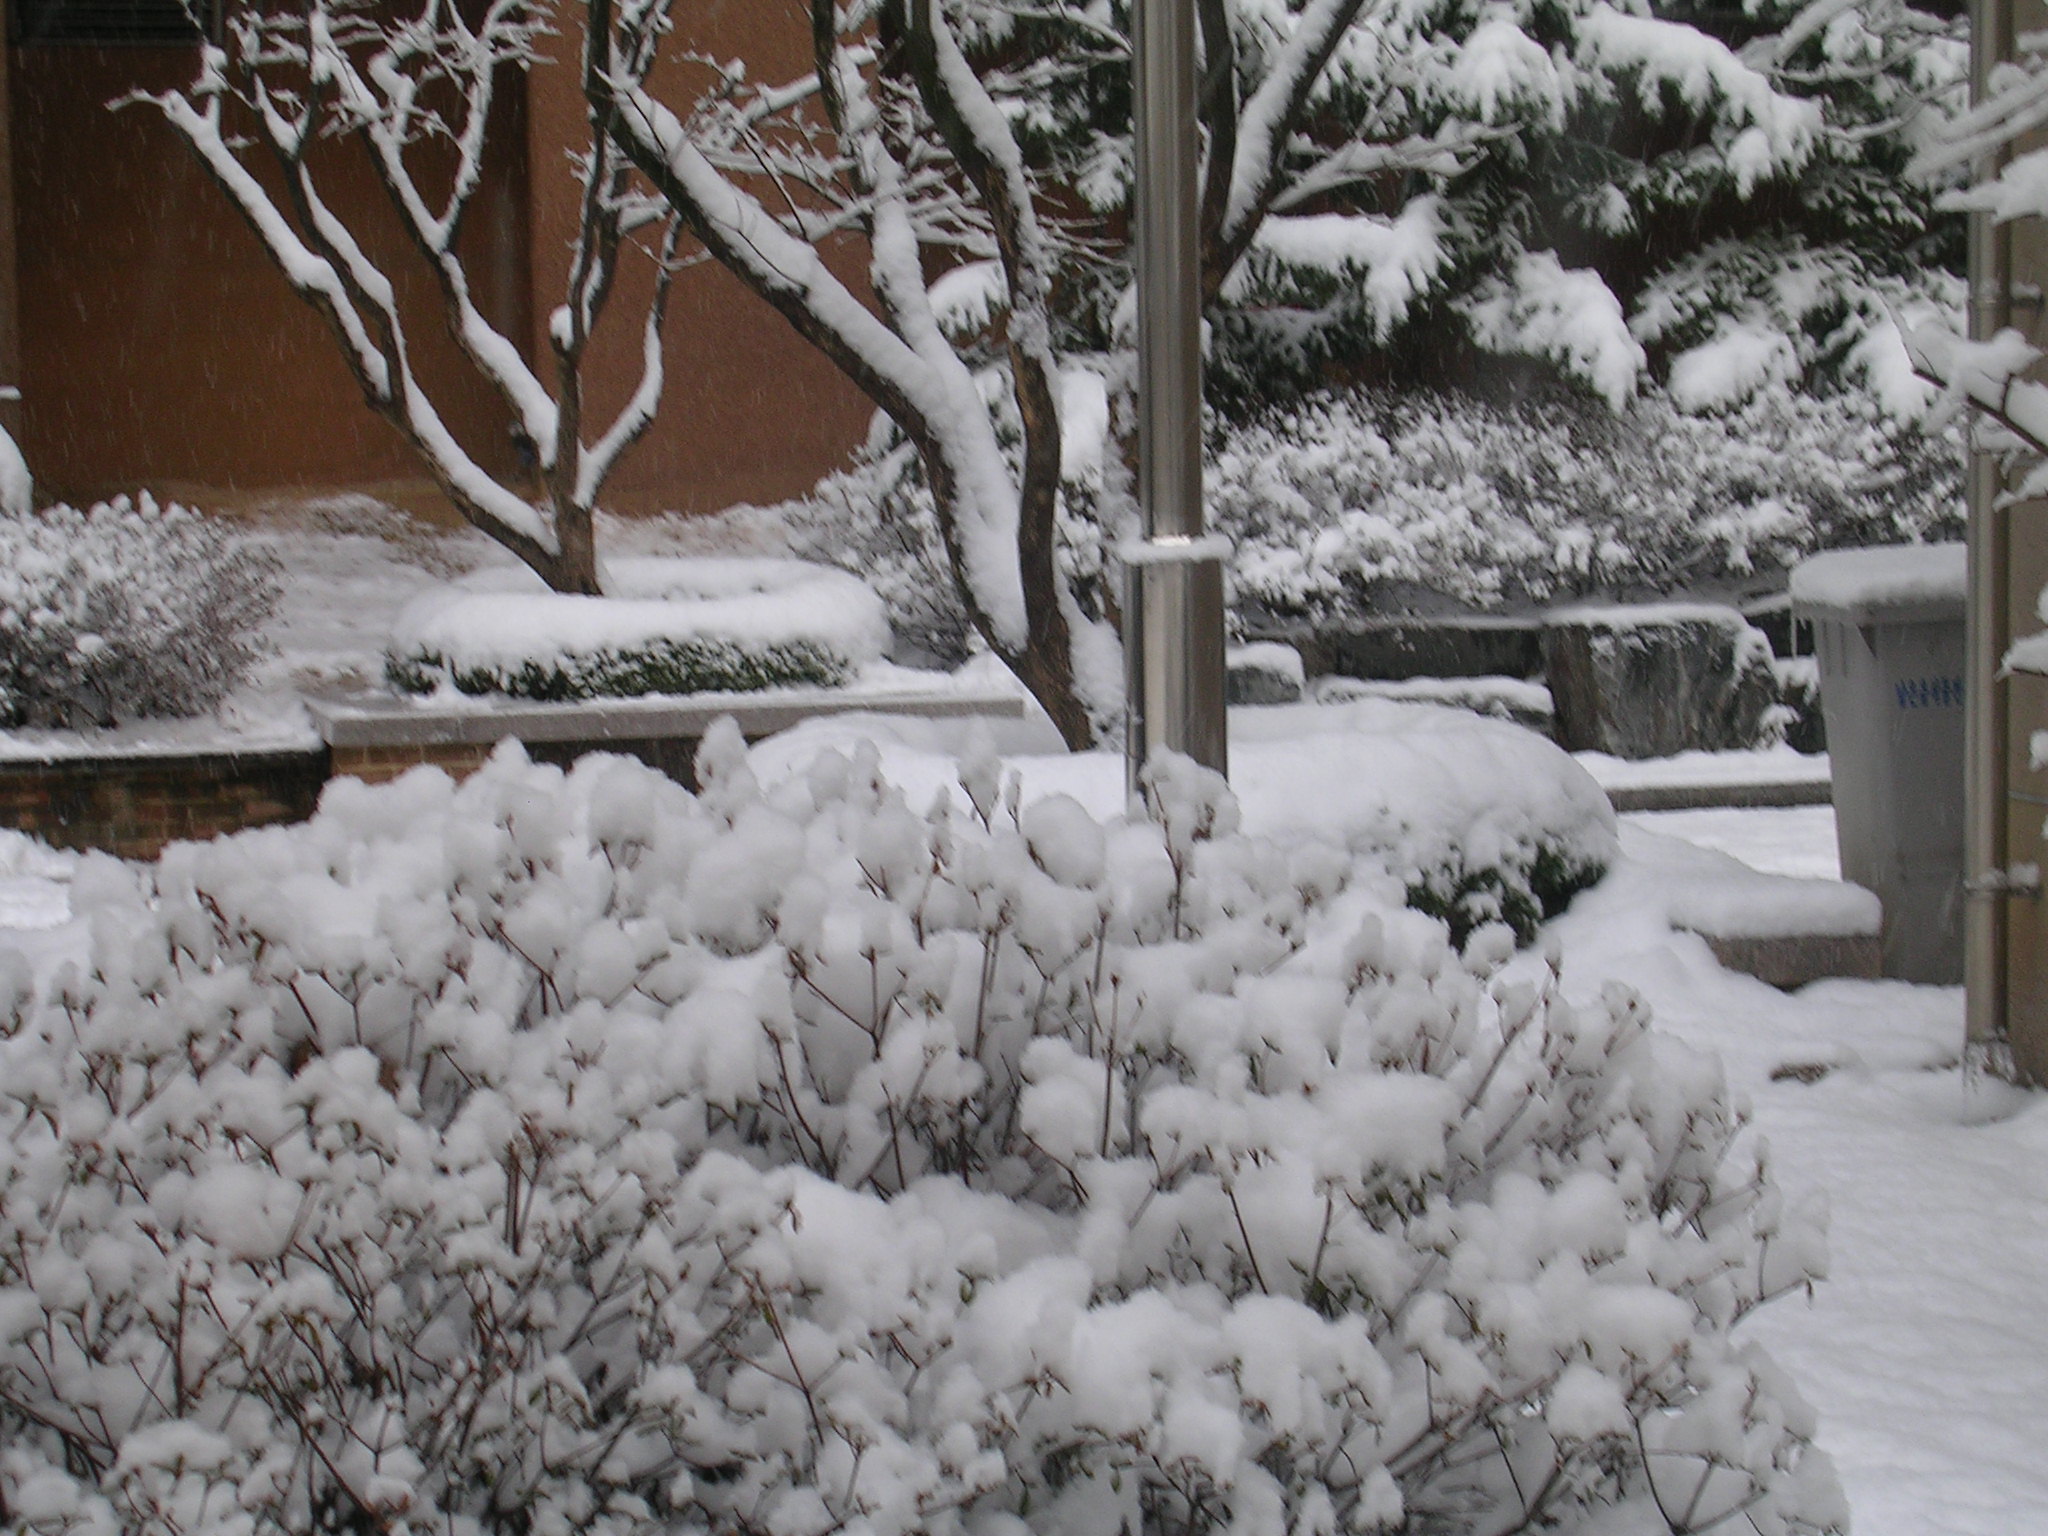 File:Snow on bushes.JPG - Wikimedia Commons